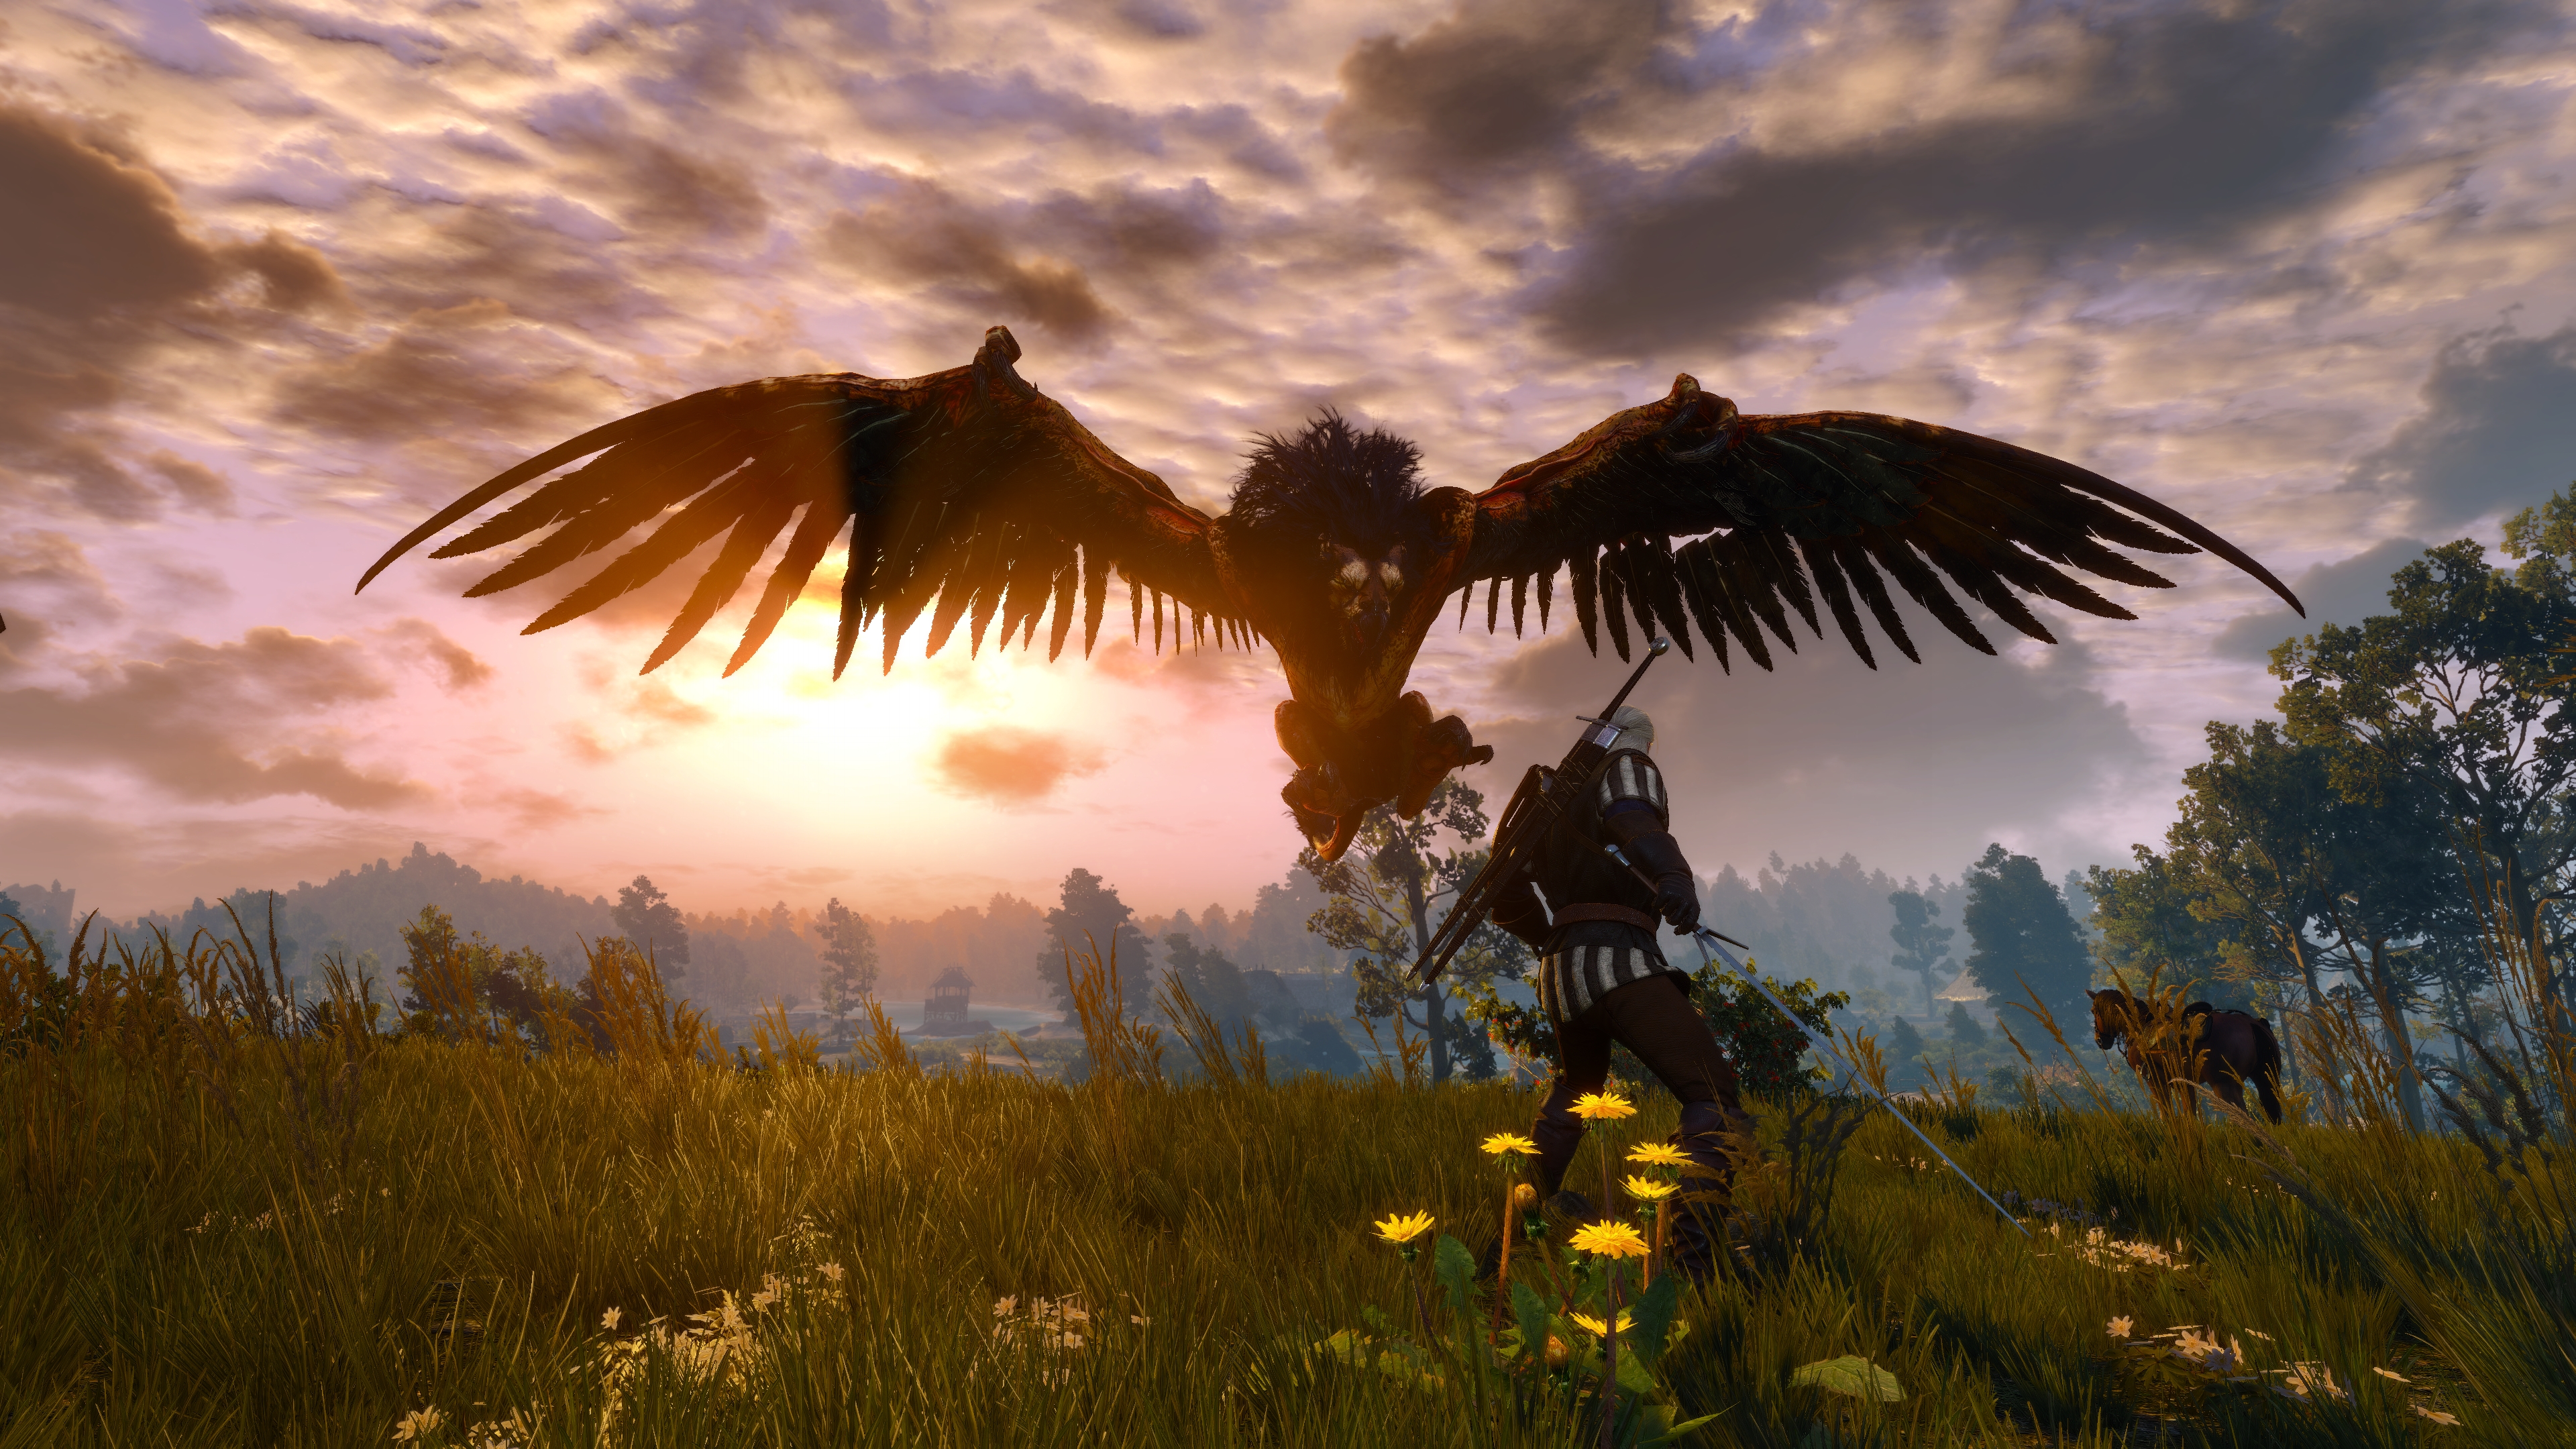 General 3840x2160 The Witcher 3: Wild Hunt screen shot griffon video game art clouds video games nature video game characters CGI video game men standing sword men with swords creature white hair trees sky grass